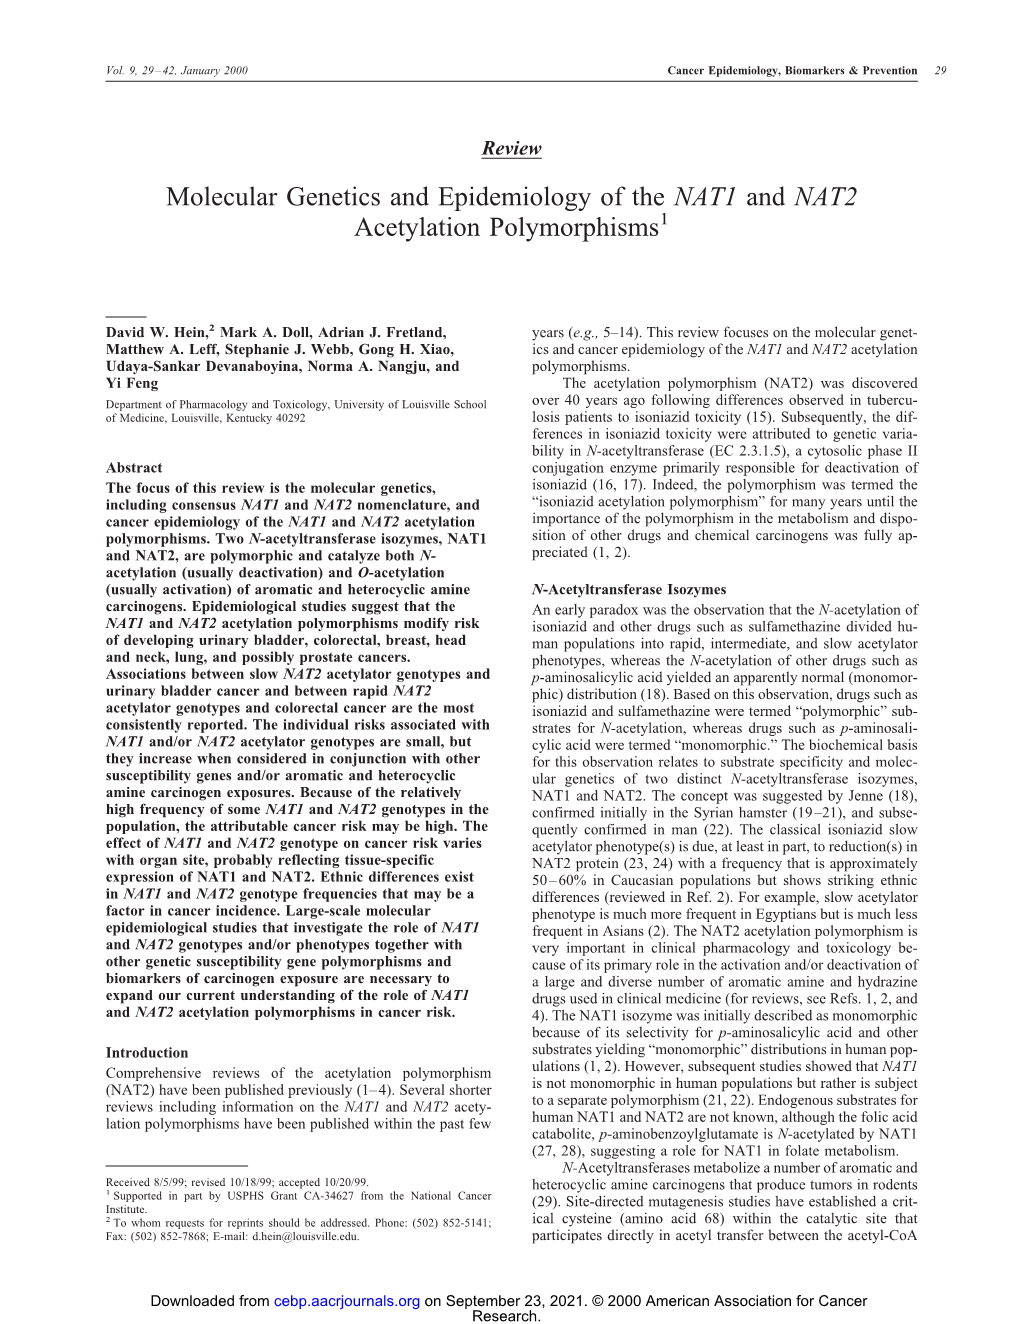 Molecular Genetics and Epidemiology of the NAT1 and NAT2 Acetylation Polymorphisms1